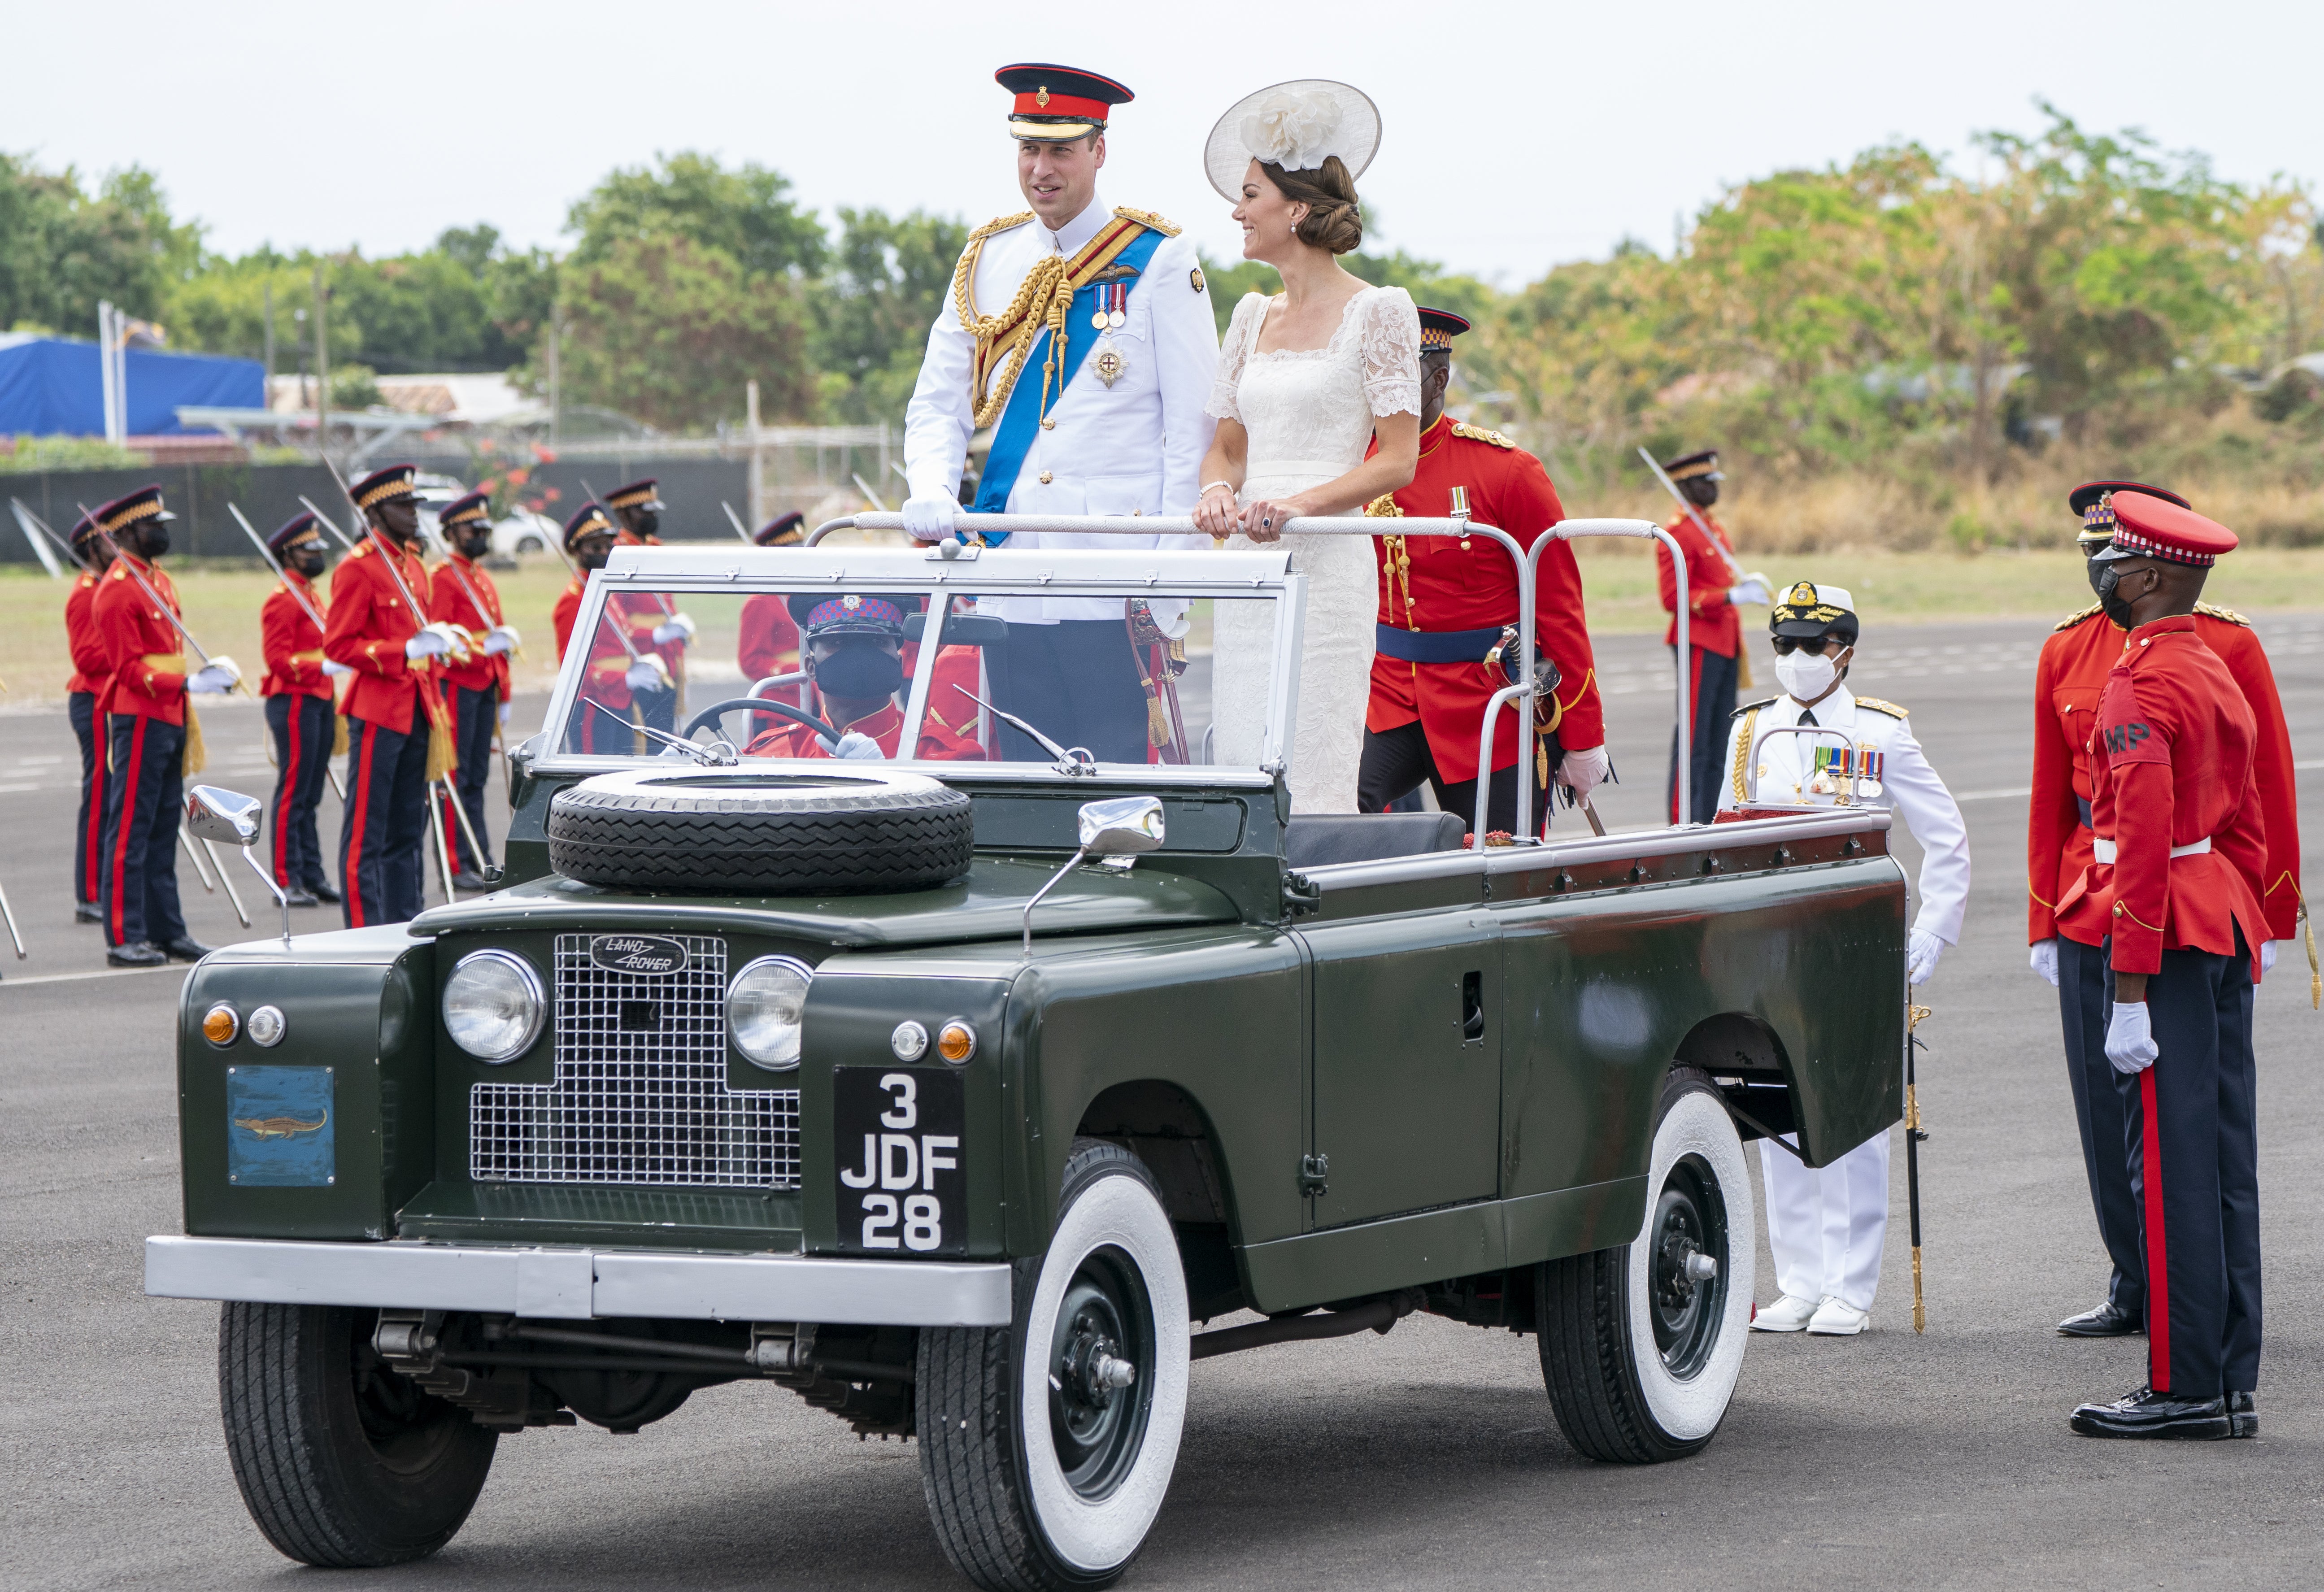 The Duke and Duchess of Cambridge attending the inaugural Commissioning Parade in Kingston, Jamaica (Jane Barlow/PA)